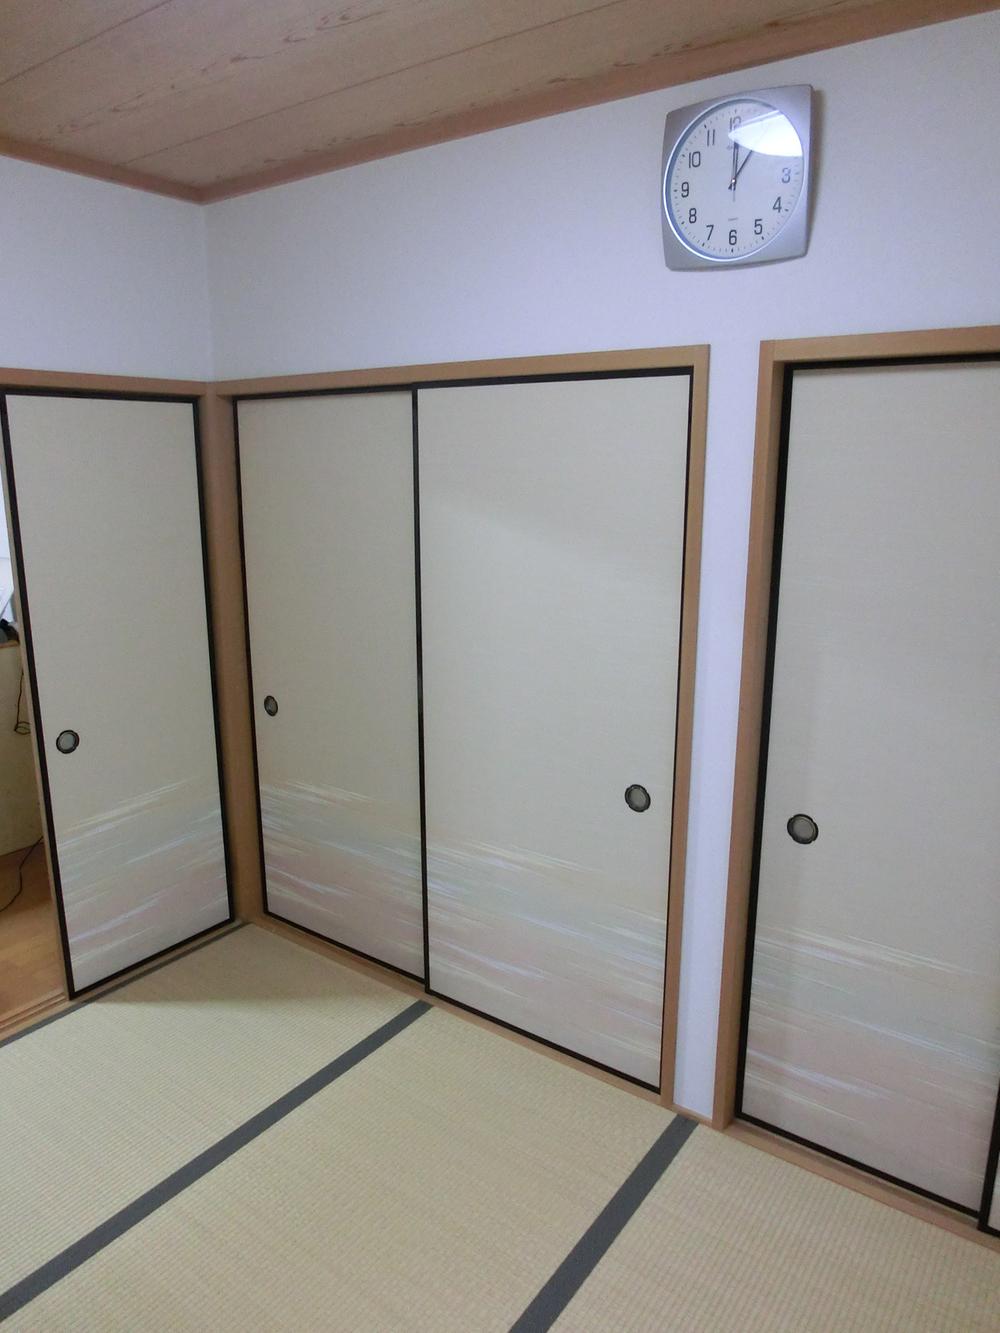 Other introspection. Enhancement is also housed on the first floor Japanese-style room